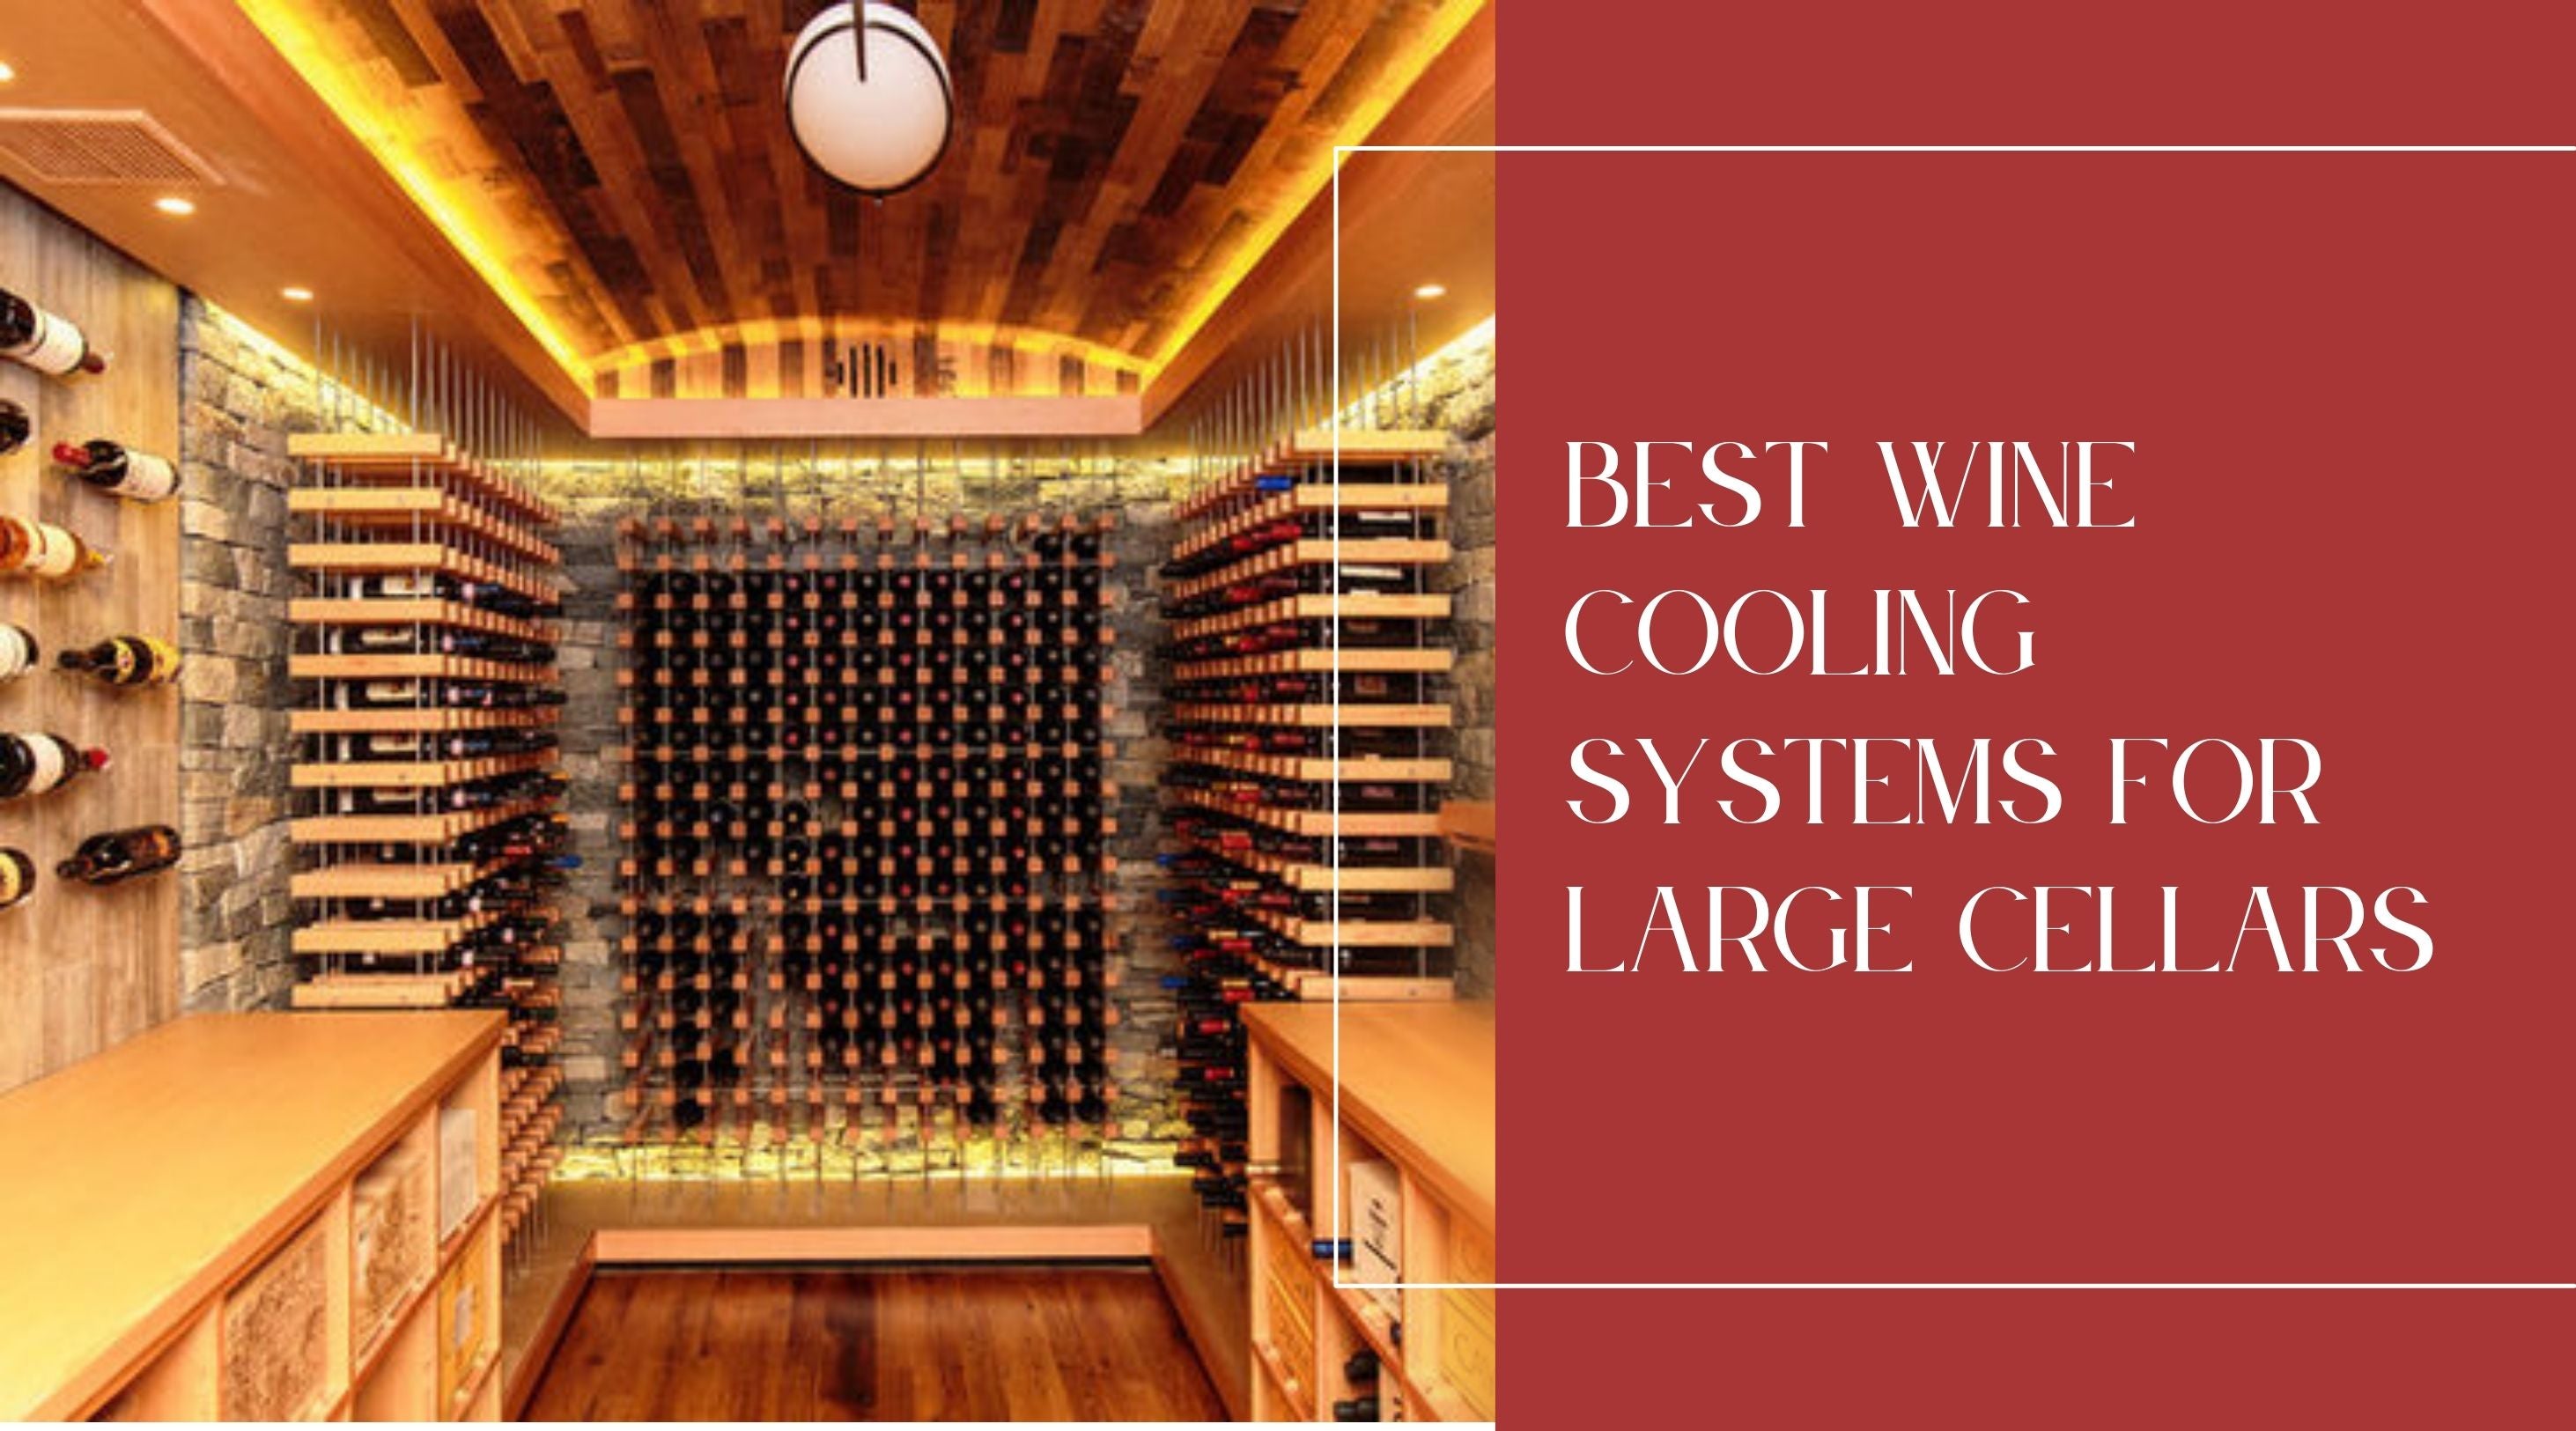 Best Wine Cooling Systems for Large Cellars | Wine Coolers Empire 